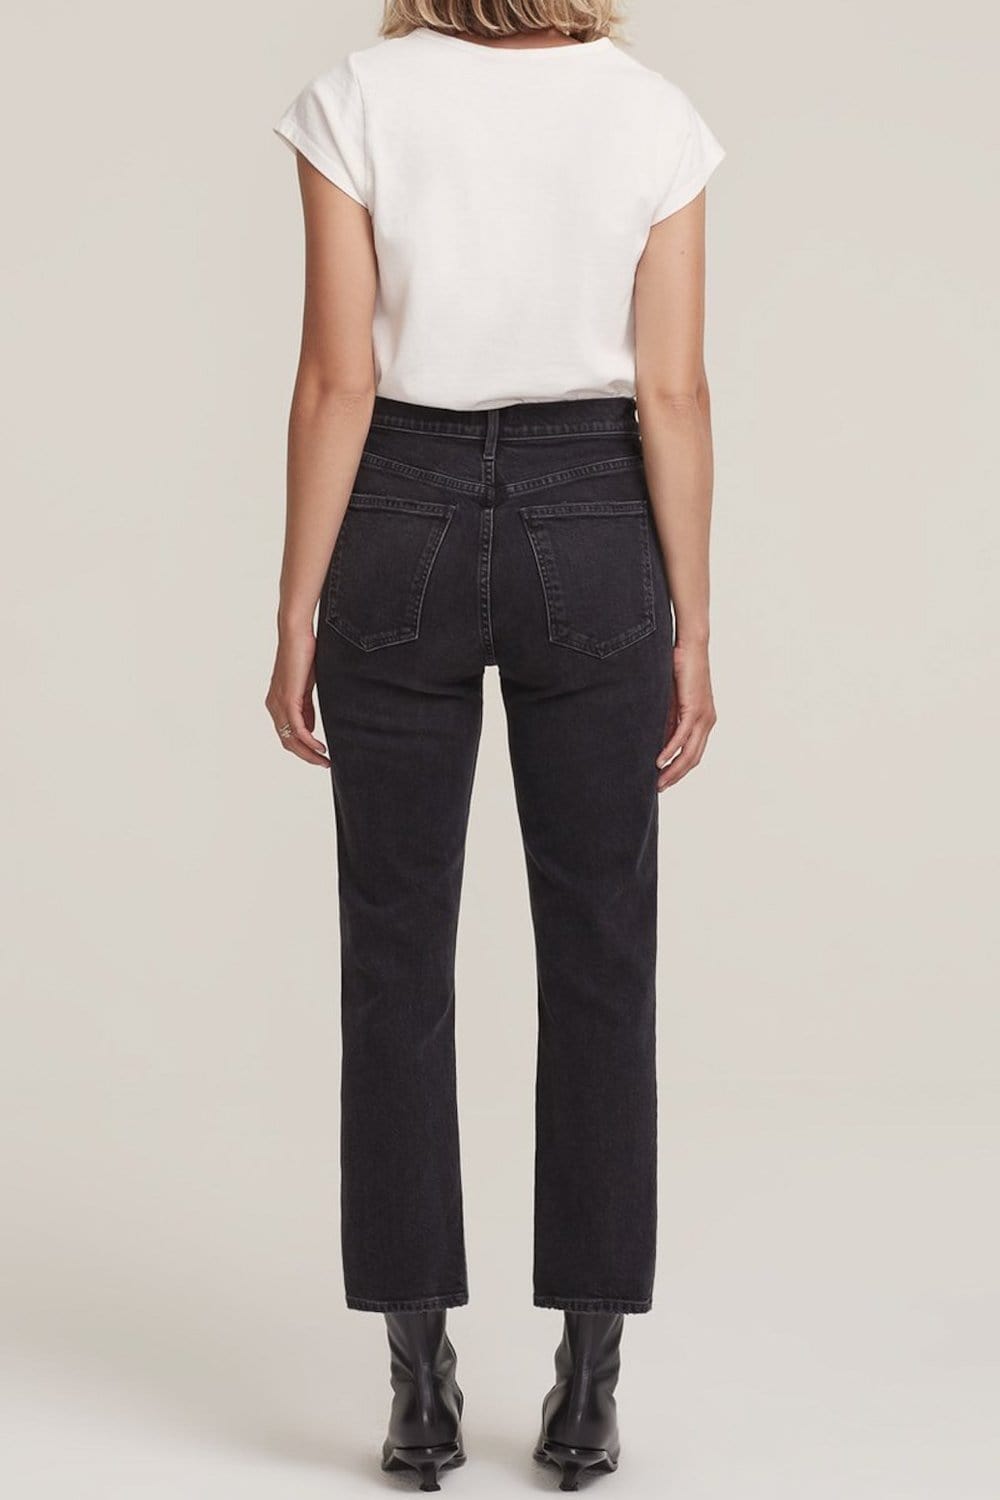 Agolde Wilder Mid Rise Straight Jean Panoramic